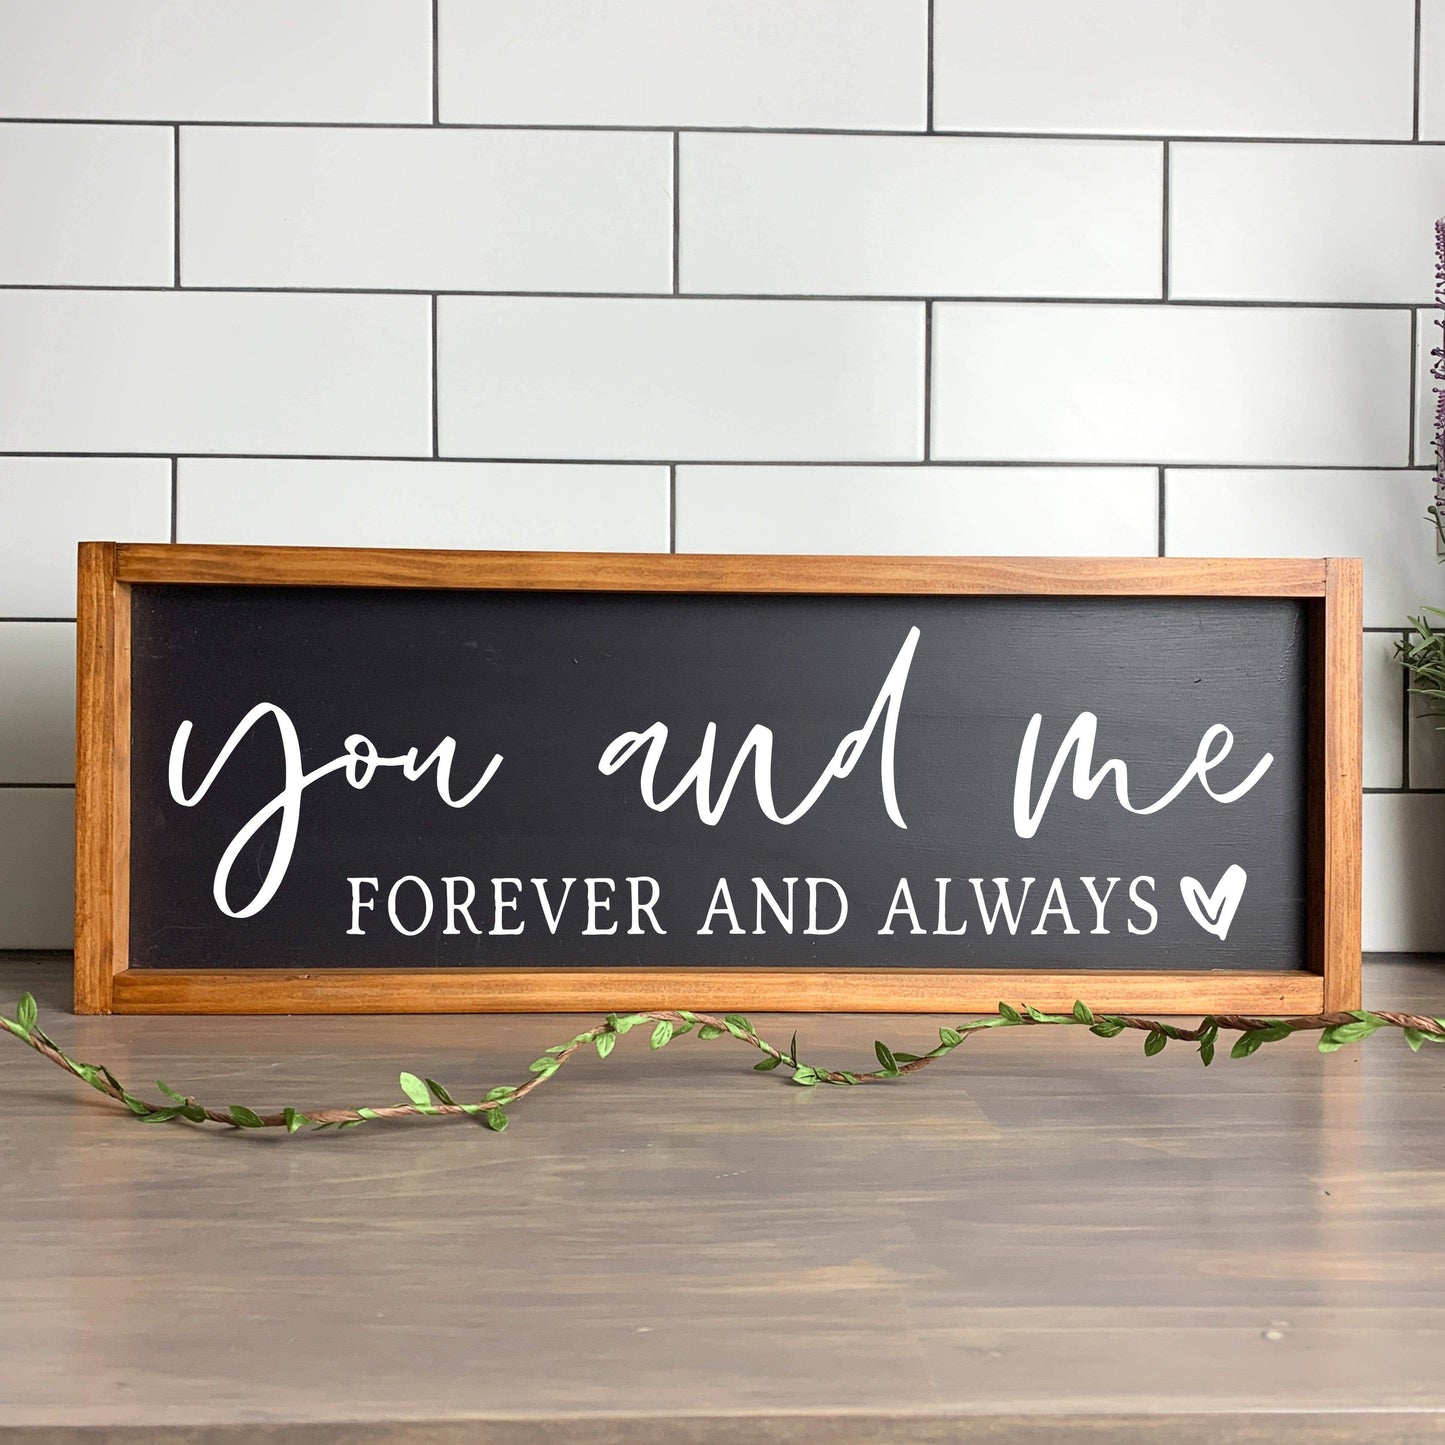 You and Me, Forever Always framed wood sign, farmhouse sign, rustic decor, home decor